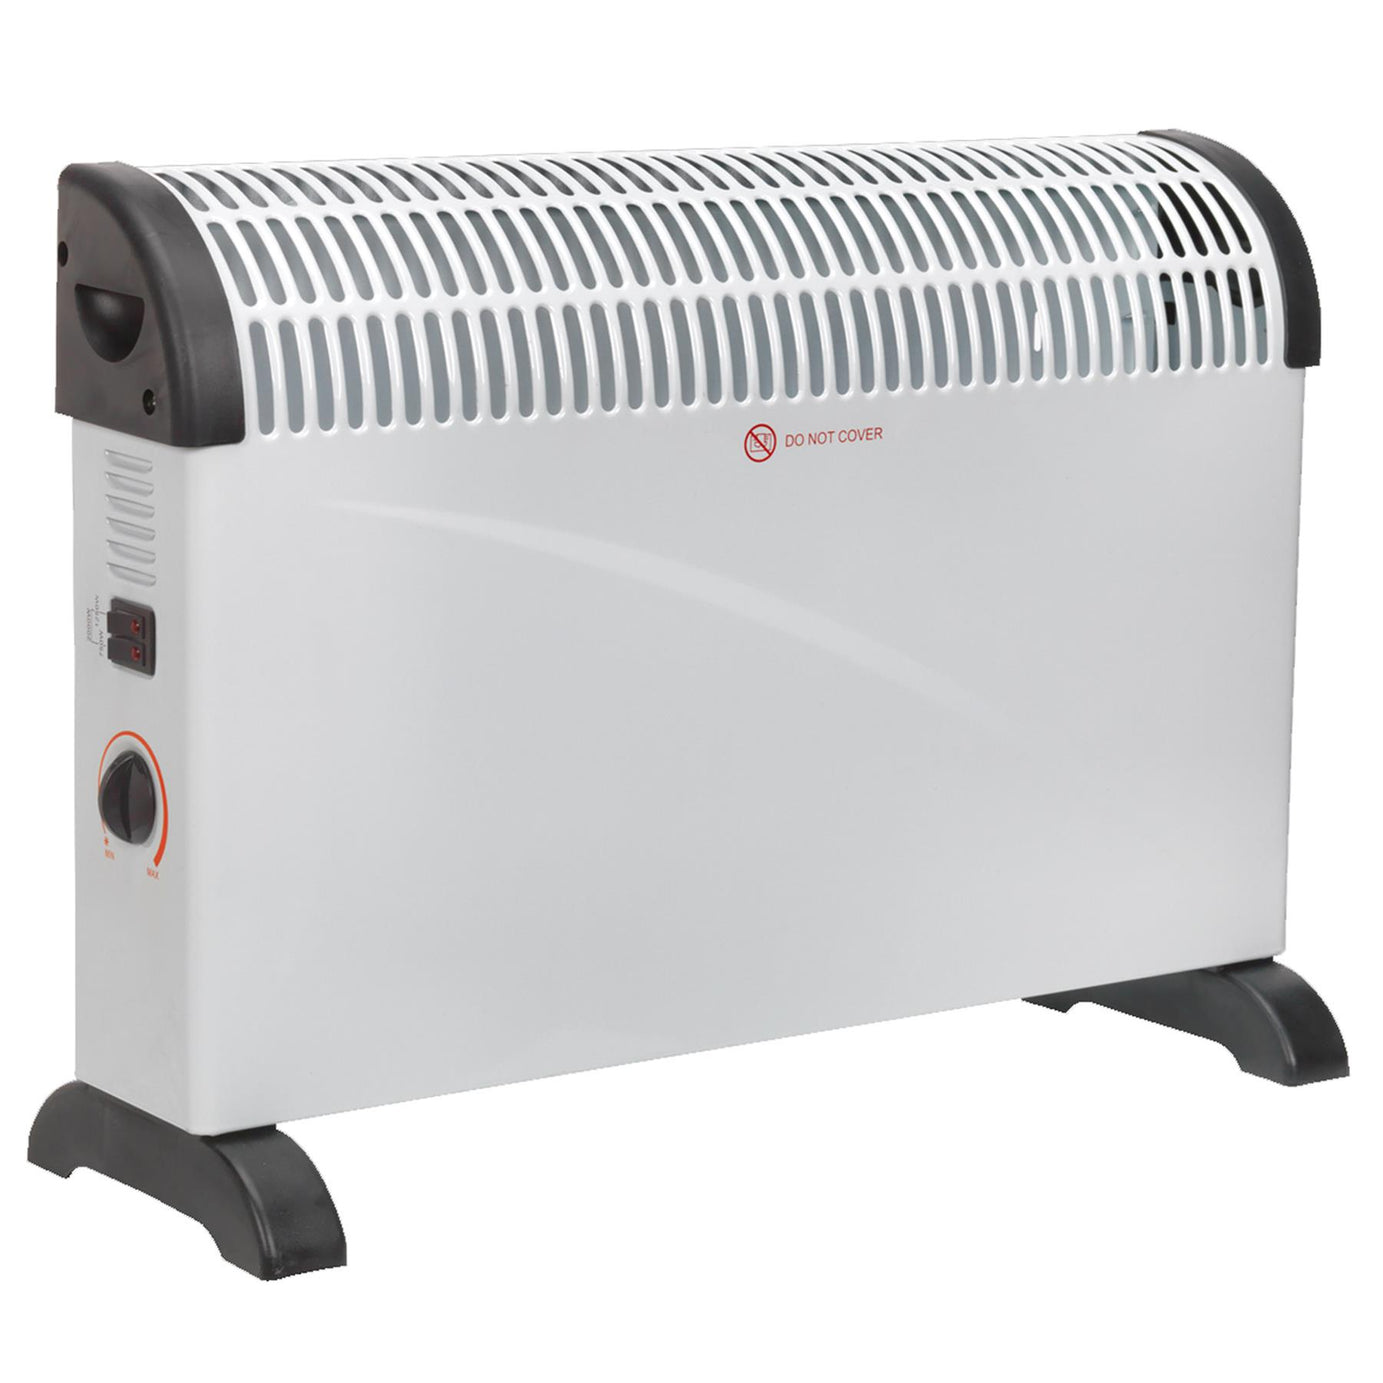 Sealey Convector Heater 2000W/230V 3 Heat Settings Thermostat CD2005